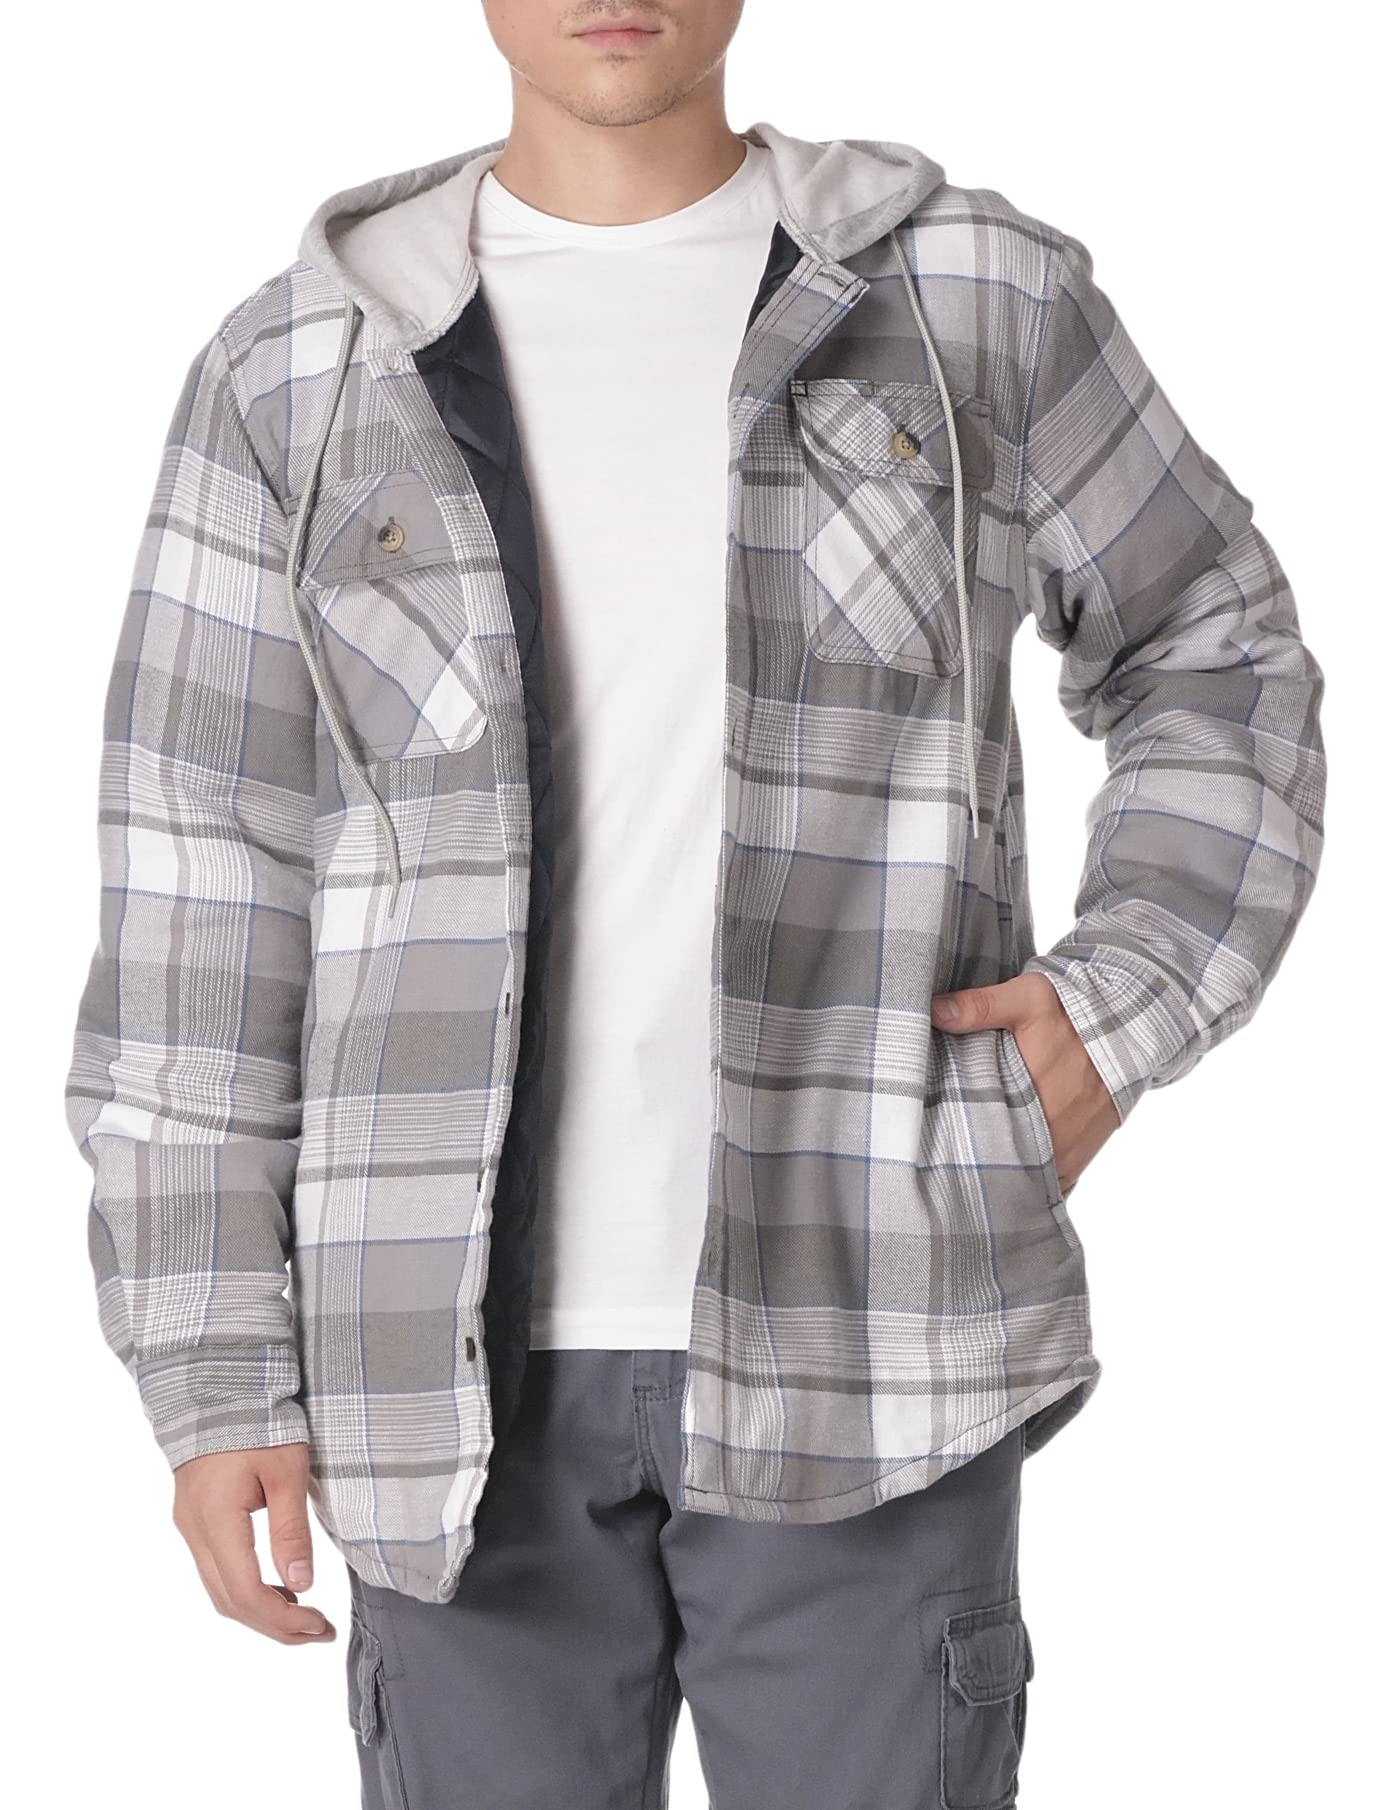 Wrangler Authentics Men's Long Sleeve Quilted Lined Flannel Shirt Jacket with Hood, Cloud Burst with Gray, S